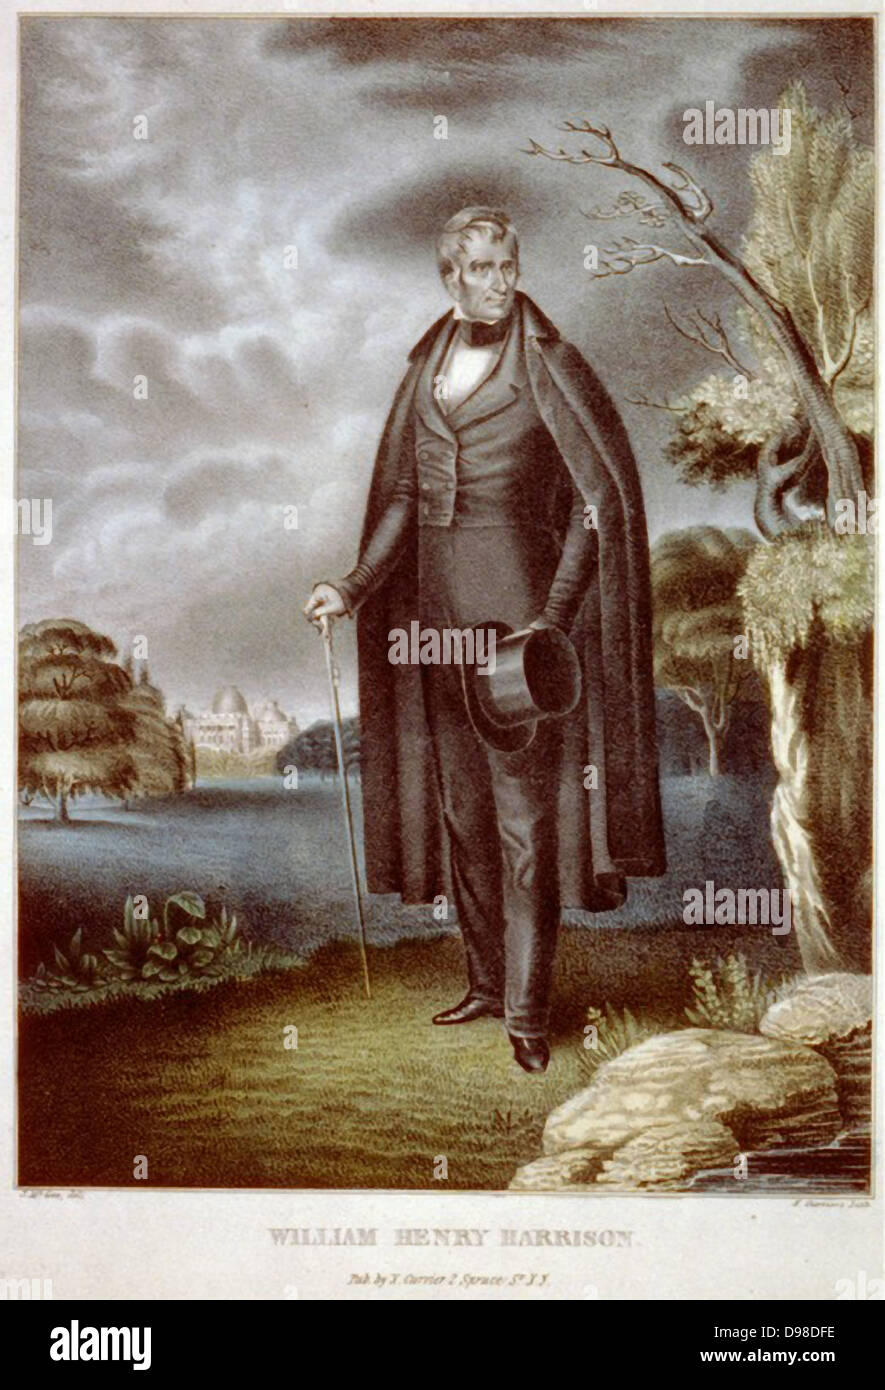 William Henry Harrison (1773-1841) American soldier and politician. Ninth President f the United States of America 1841. Died on 32nd day in office, the shortest presidential tenure to date and first President to die in office. Coloured lithograph. Stock Photo